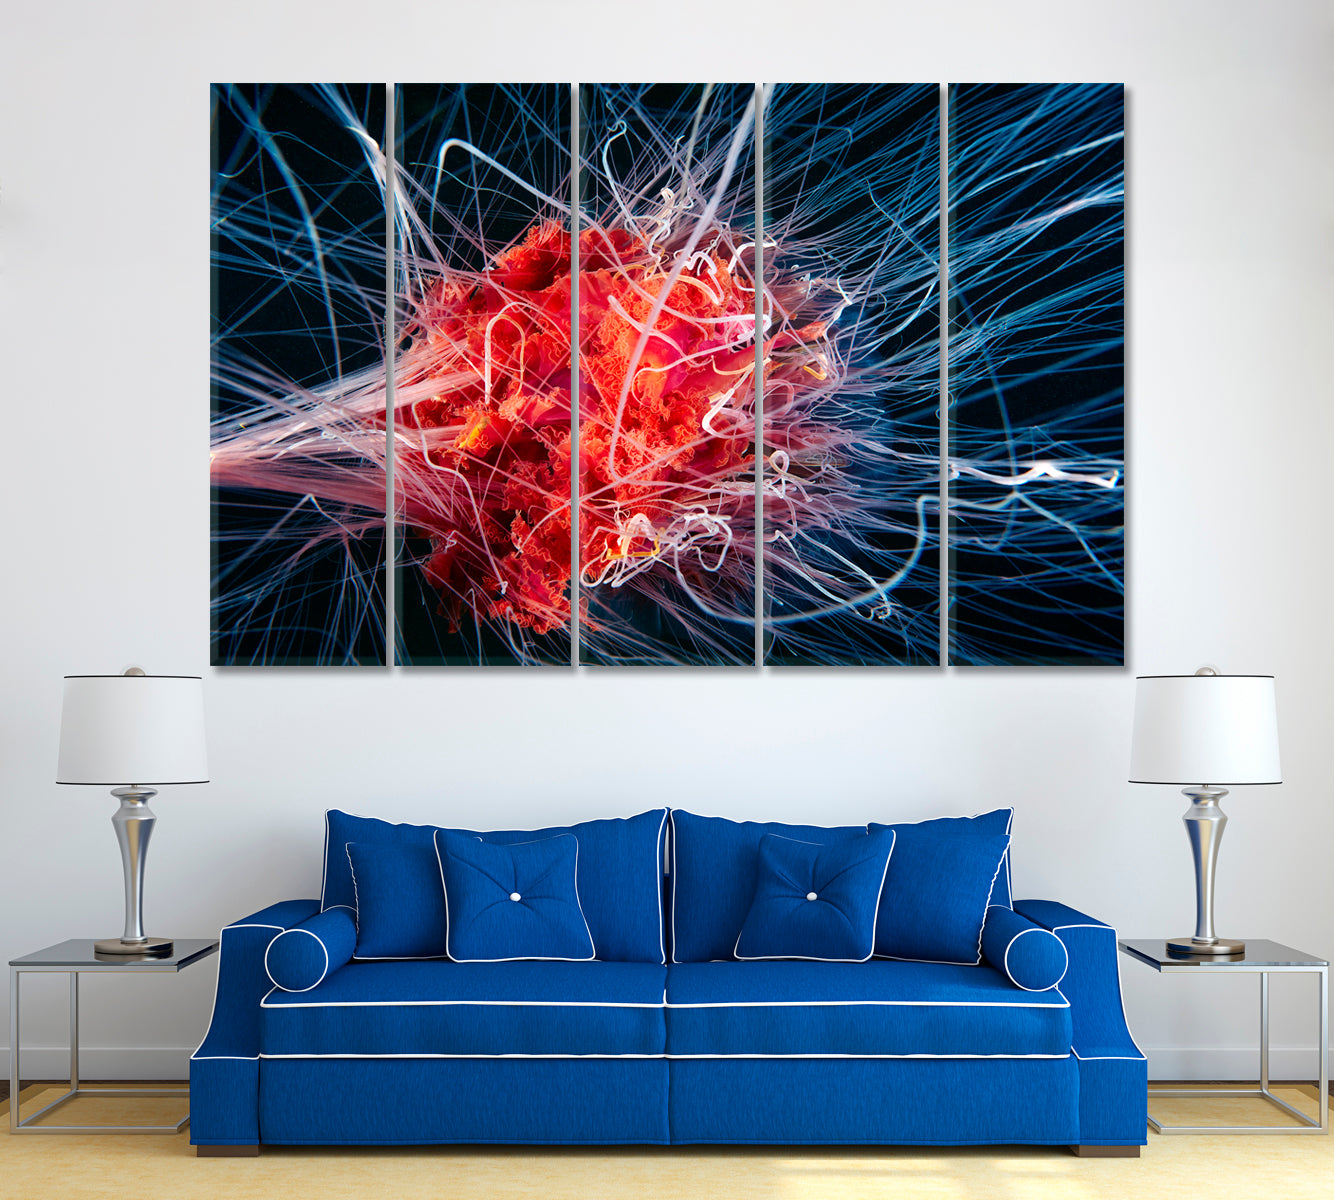 Tentacles of Jellyfish Canvas Print ArtLexy 5 Panels 36"x24" inches 